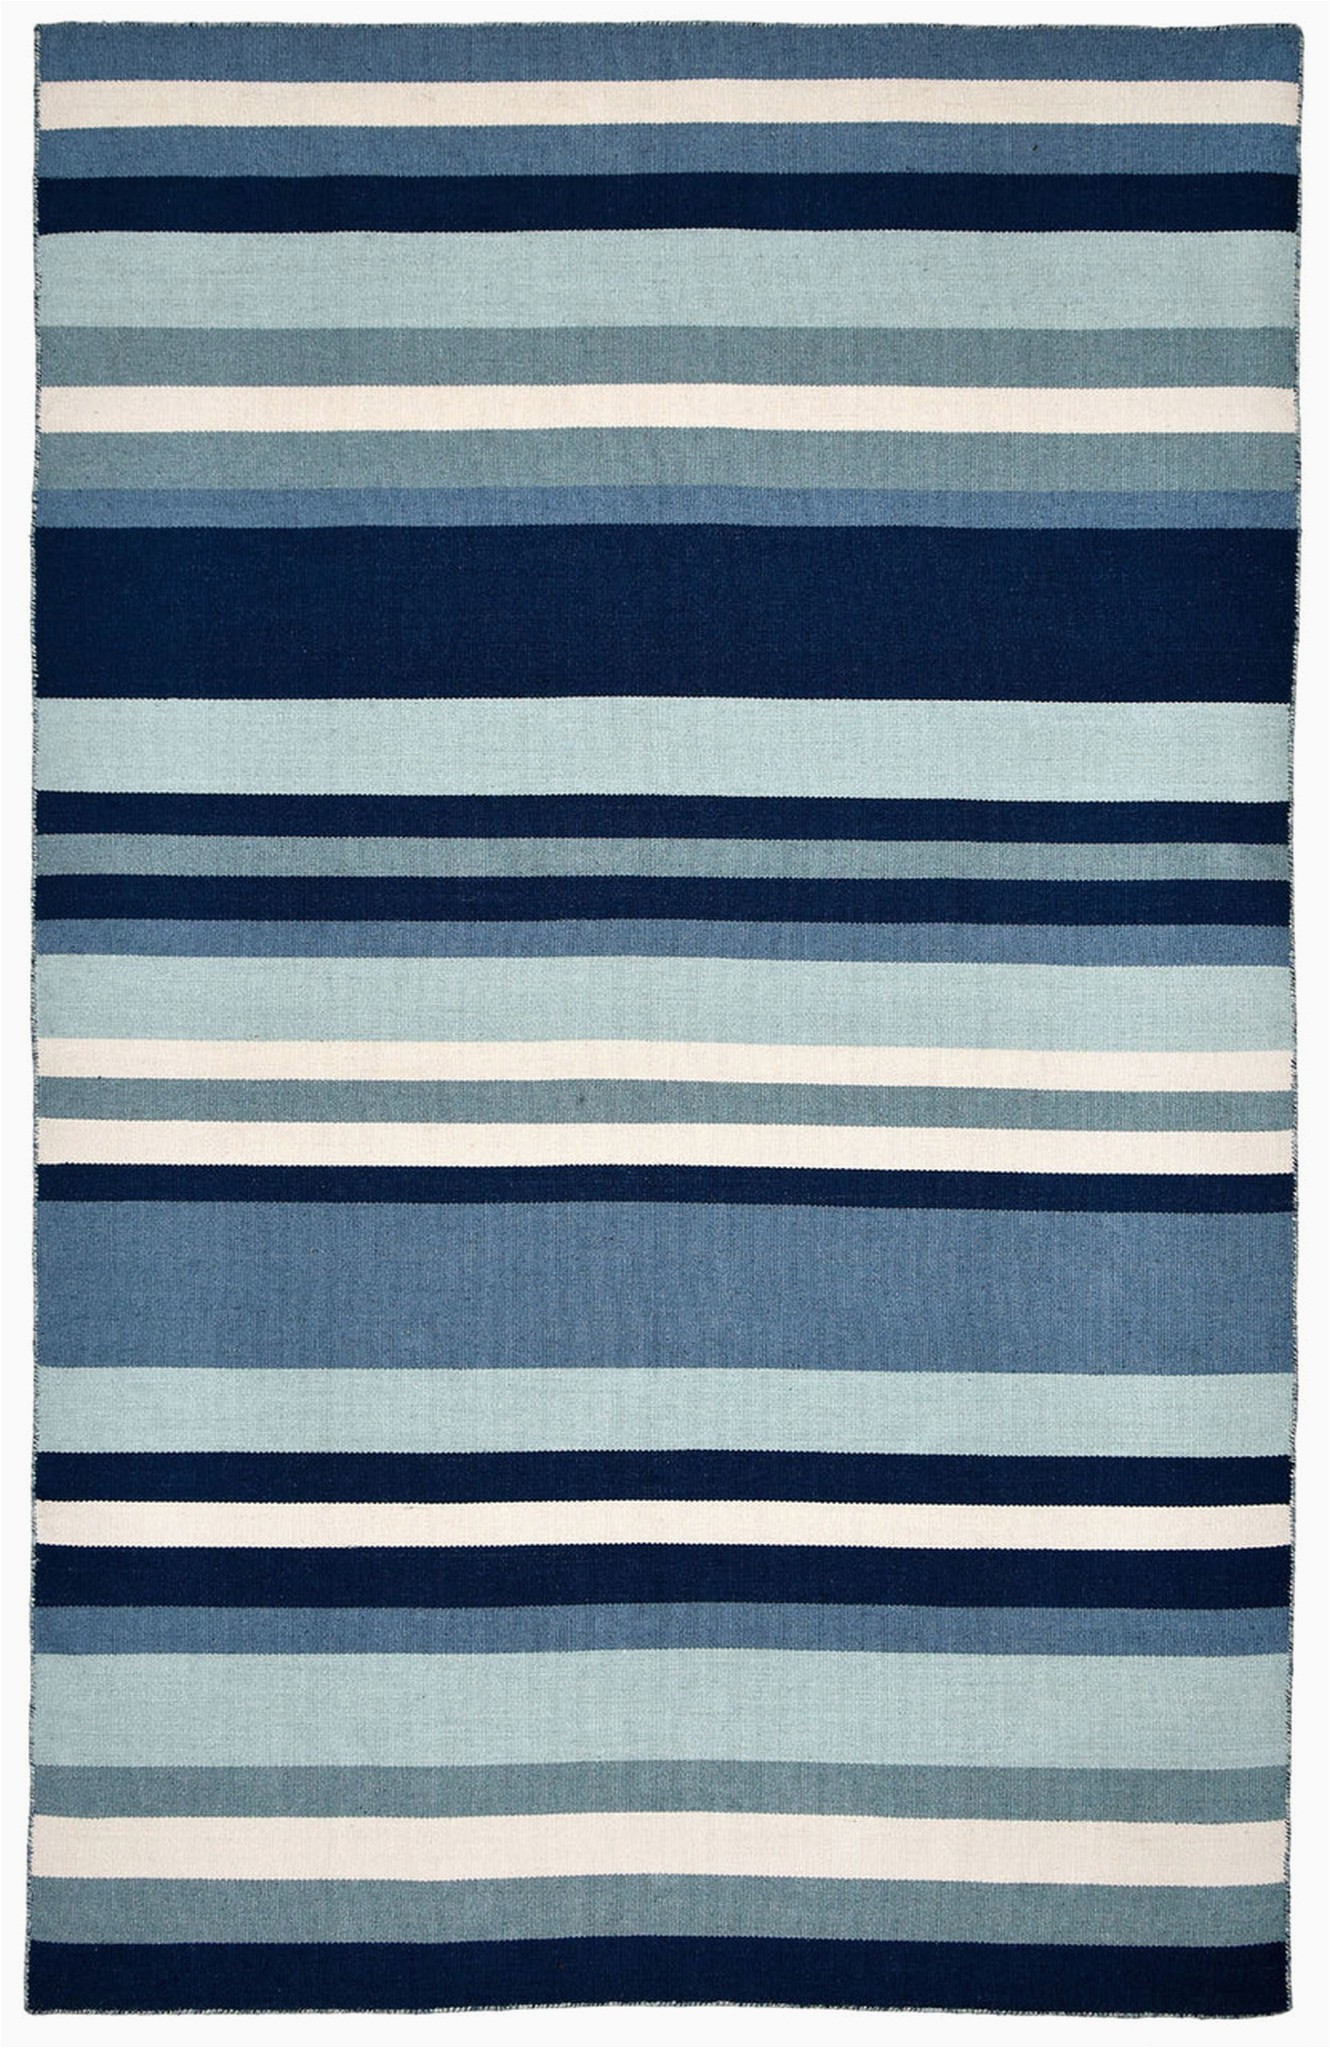 Blue White Outdoor Rug Tribeca Water Blue Striped Woven Indoor Outdoor Rug